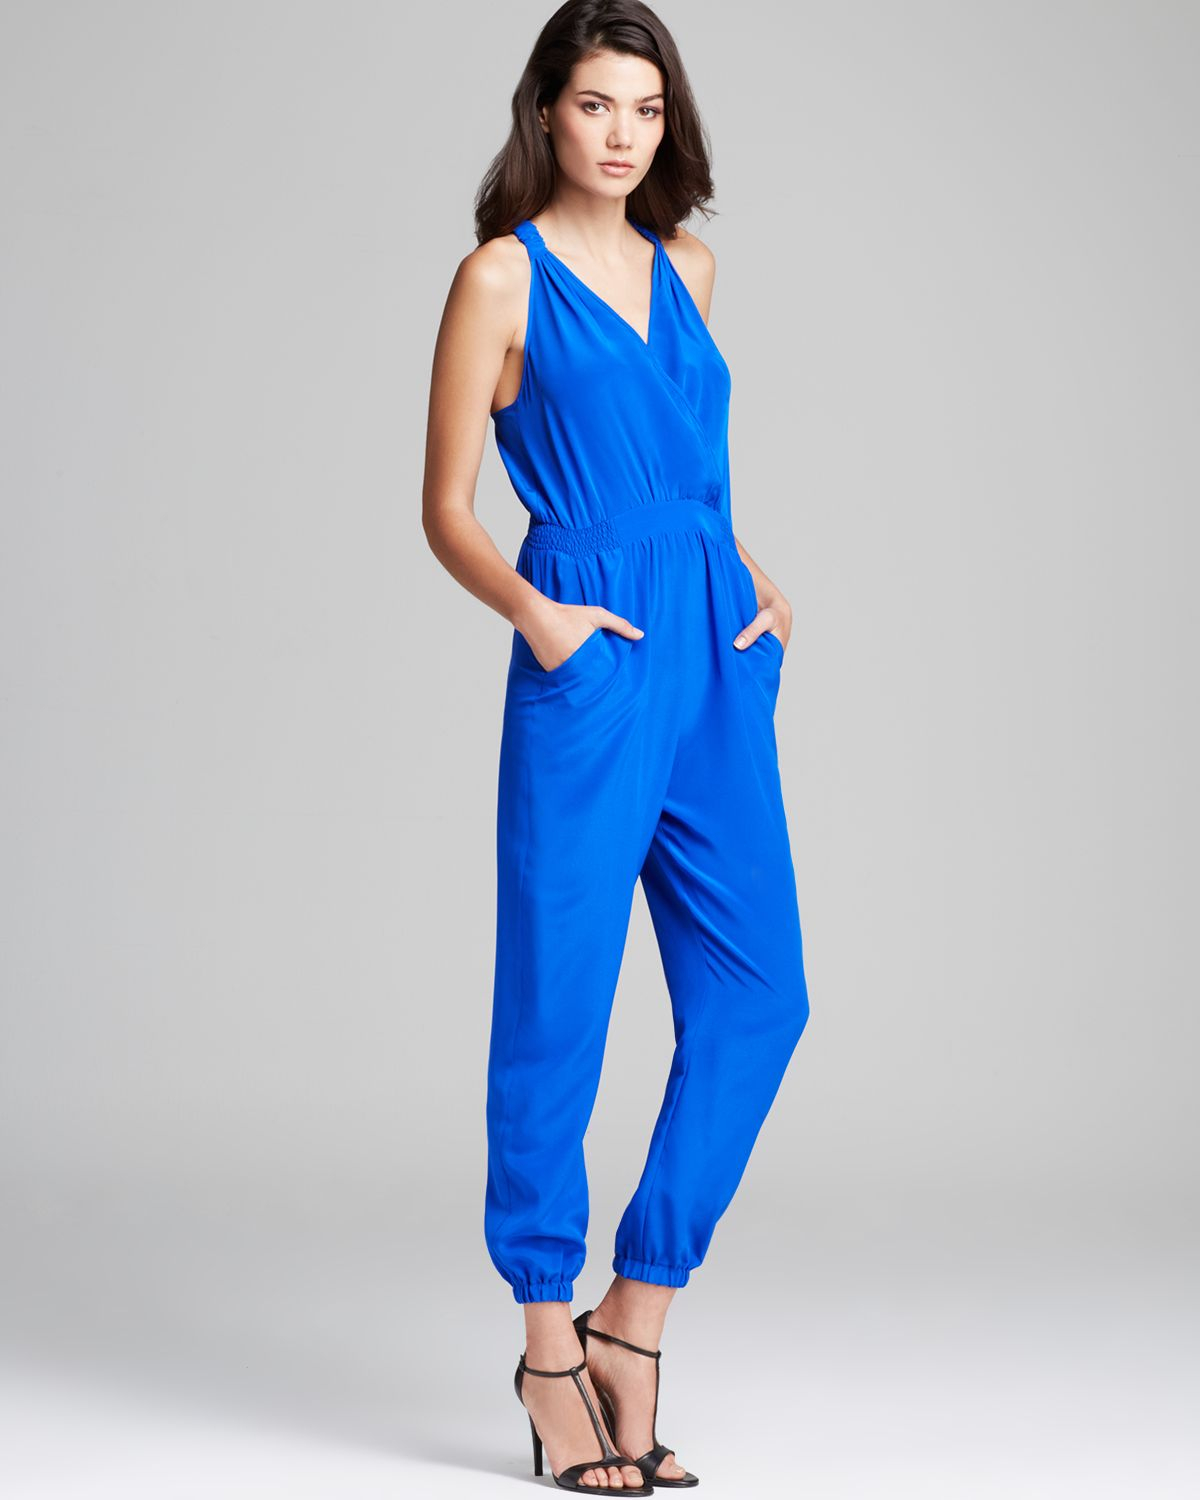 Lyst - Charlie Jade Jumpsuit Wrap Front in Blue